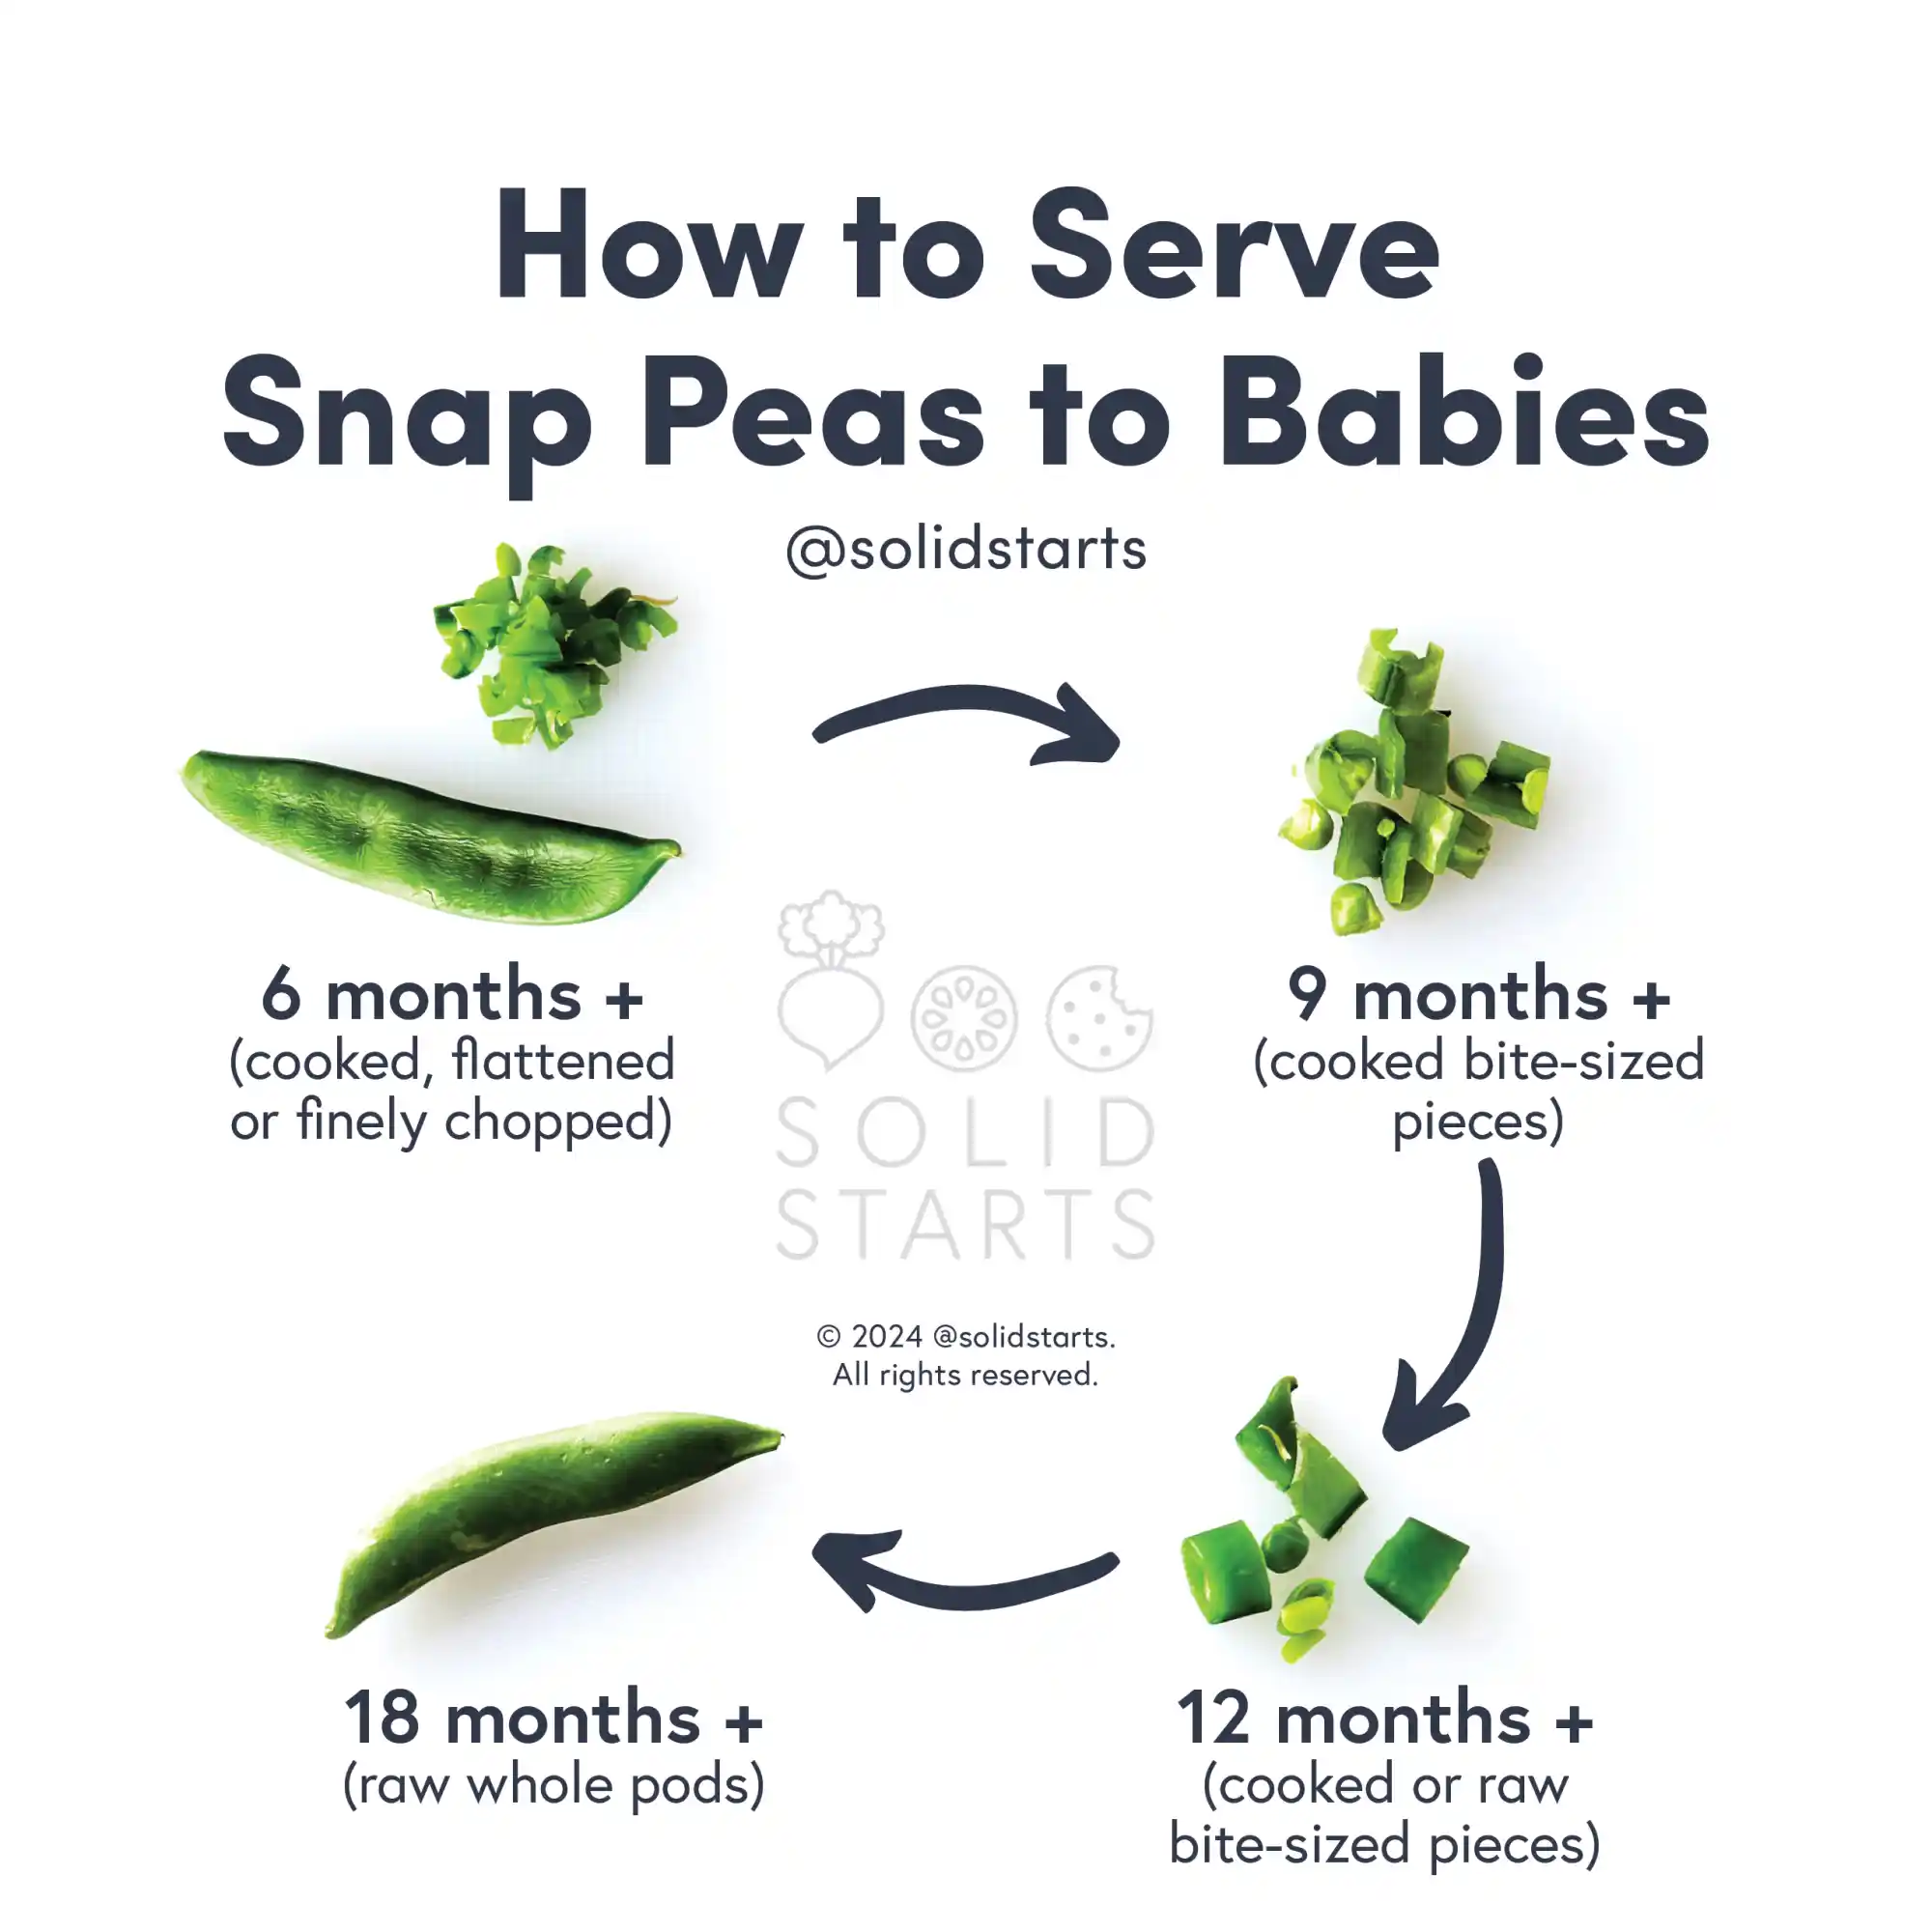 a Solid Starts infographic titled How to Serve Snap Peas to Babies: cooked, flattened or finely chopped for 6 mos +, cooked and chopped for 9 mos+, cooked or raw and chopped for 12 mos+, and a whole raw pod for 18 mos+